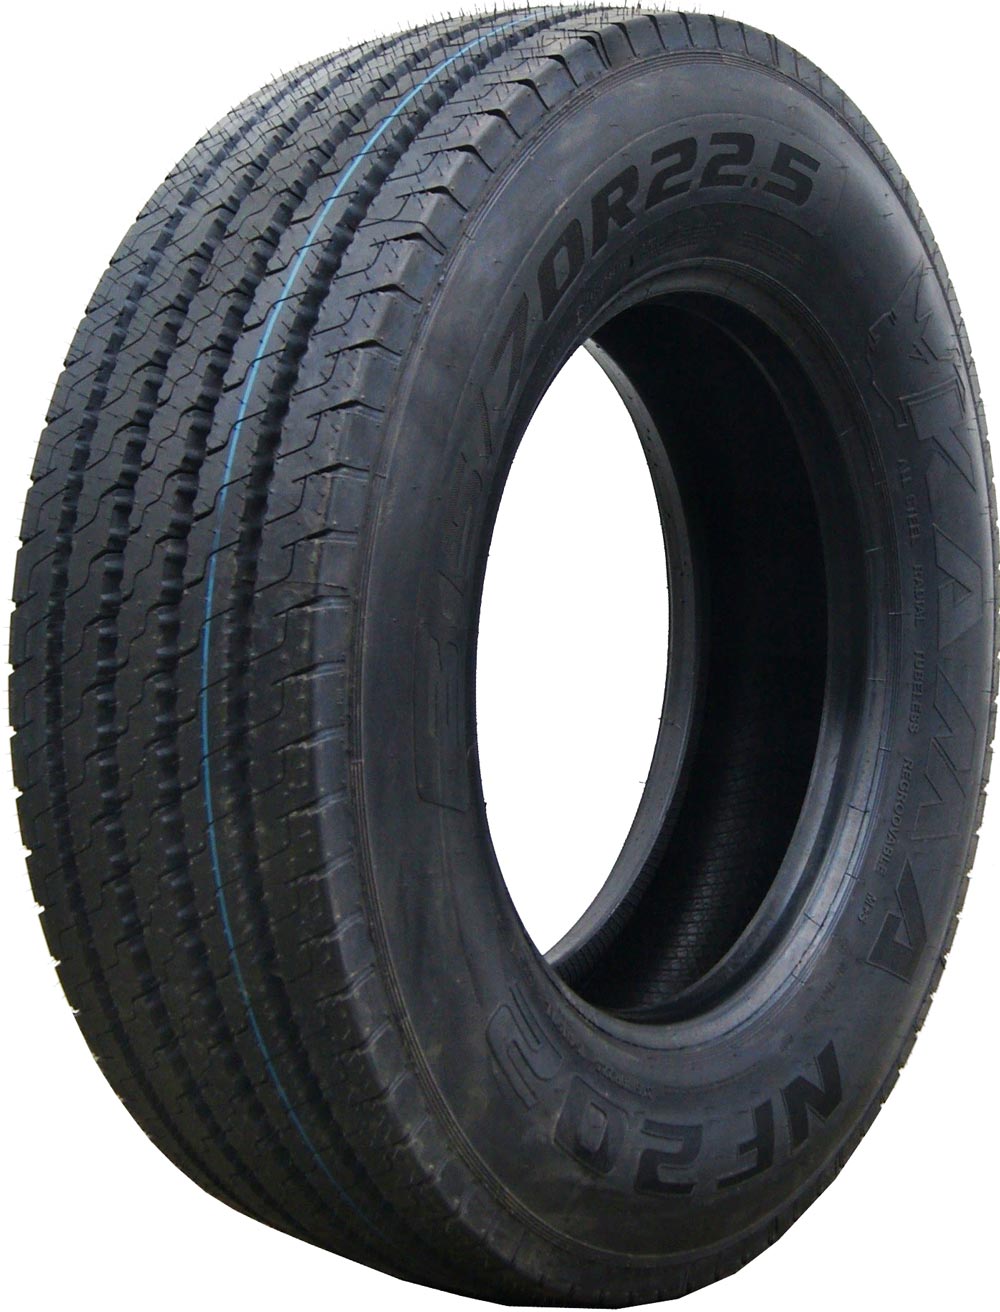 product_type-heavy_tires KAMA NF202 235/75 R17.5 132M